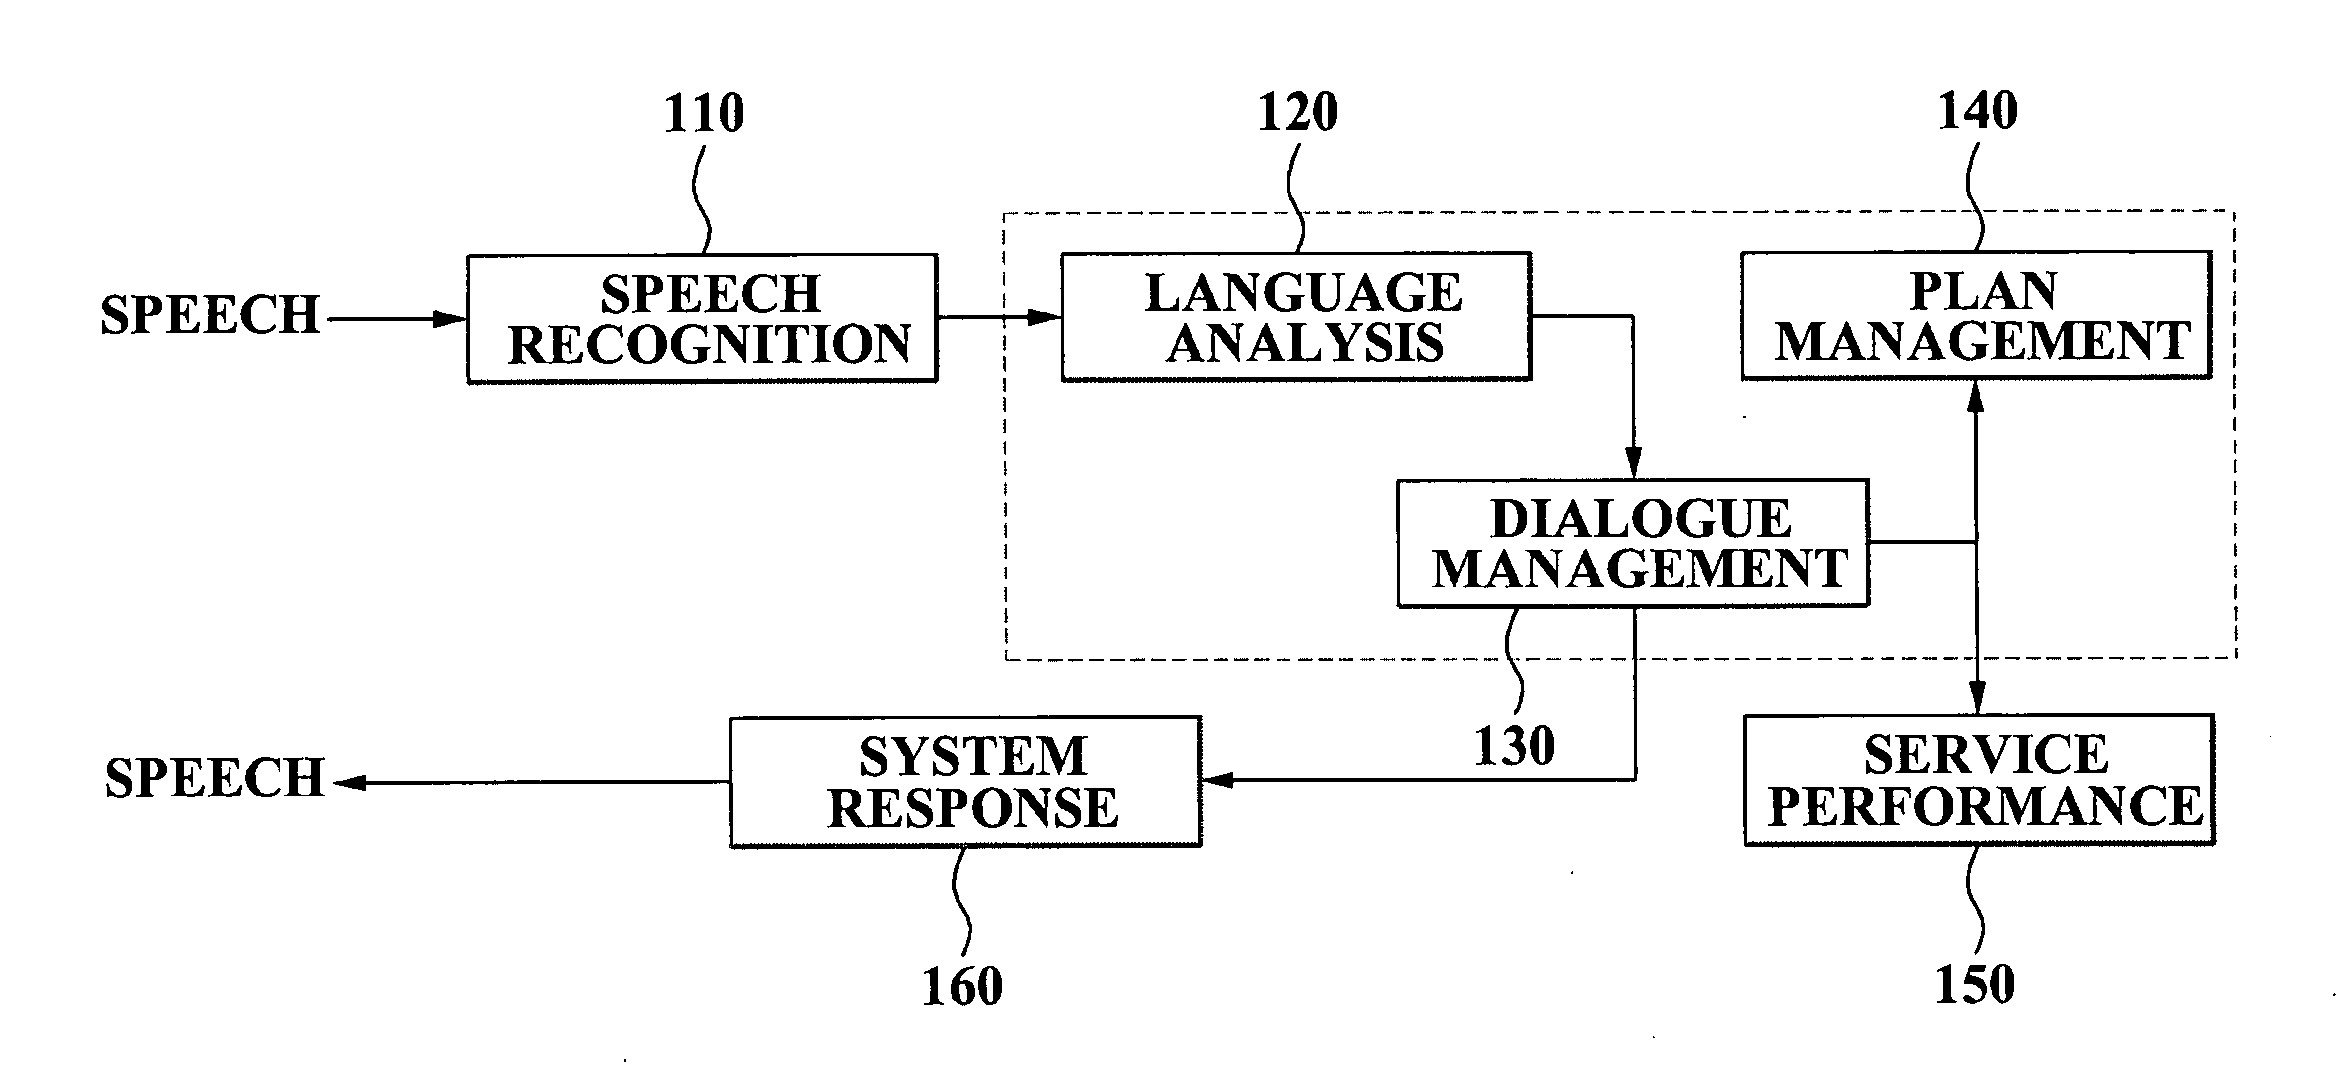 Apparatus for providing voice dialogue service and method of operating the same